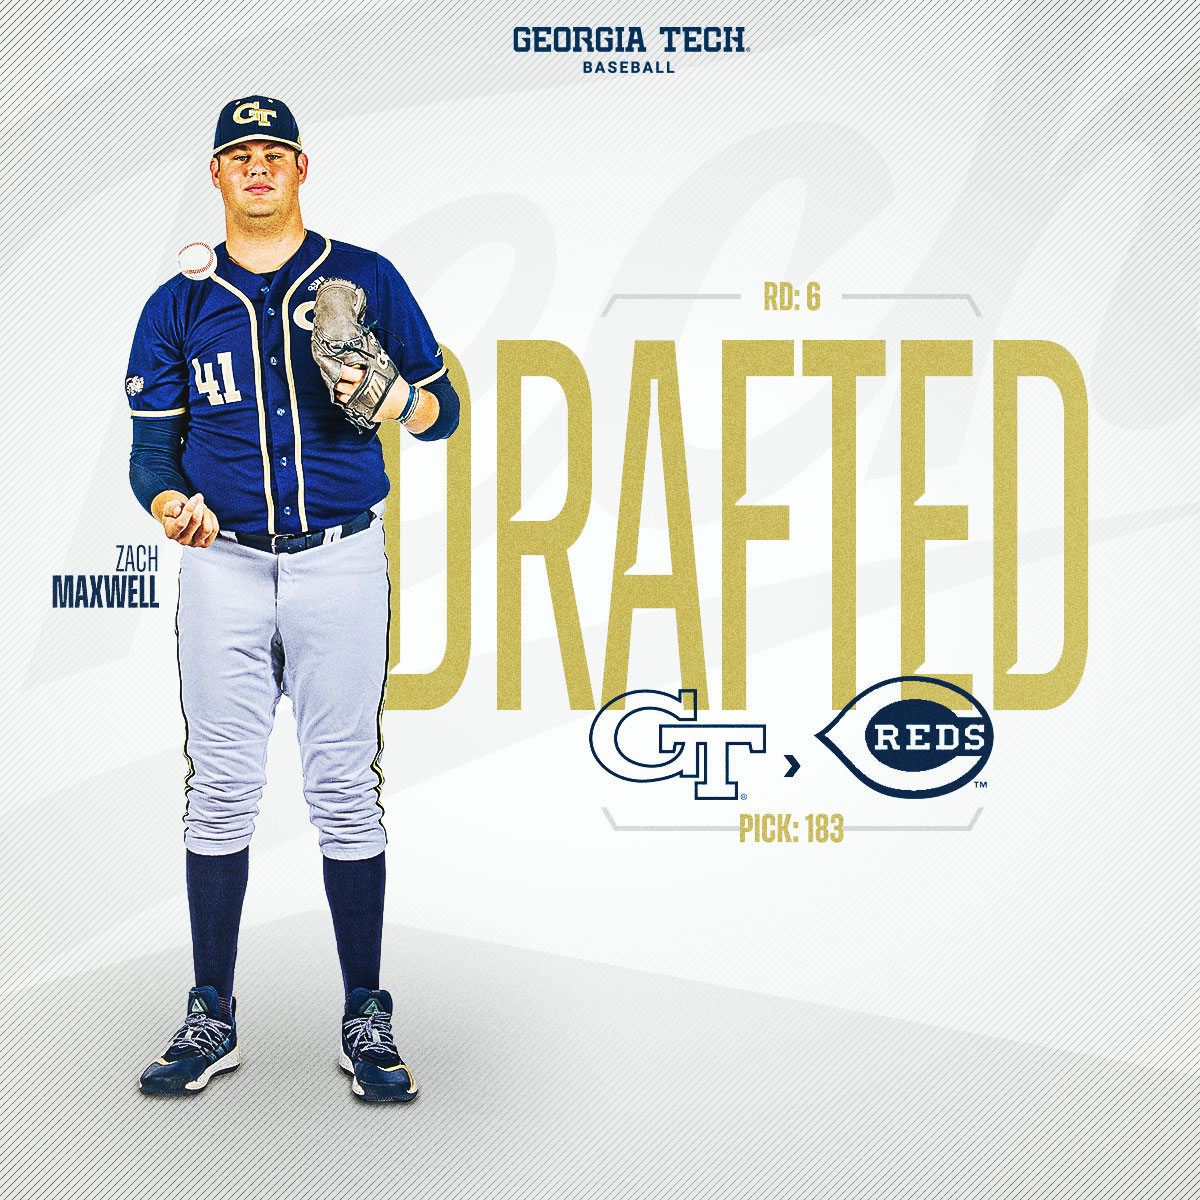 𝘿𝙍𝘼𝙁𝙏𝙀𝘿! @ZachTMaxwell is the 6th round selection for the @Reds in the 2022 @MLBDraft! #WreckHavoc // #MLBDraft